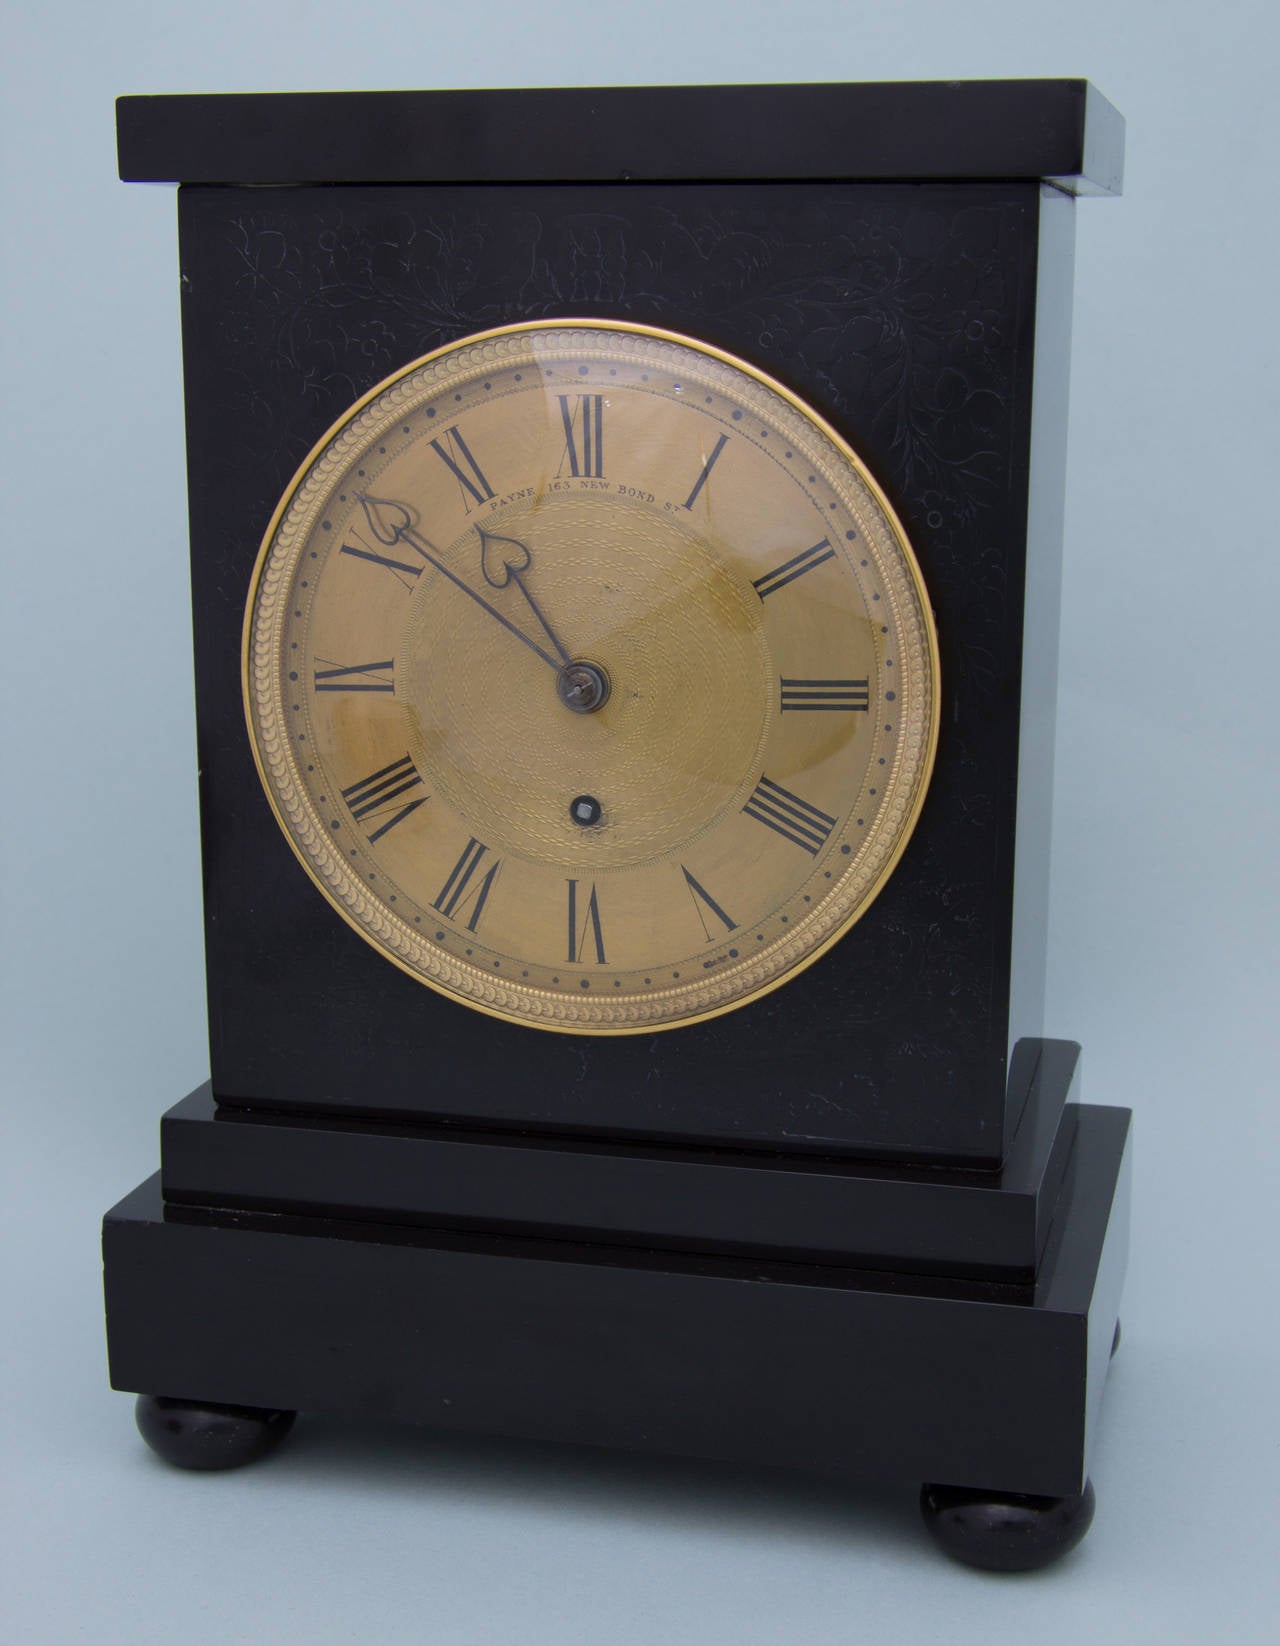 William Payne, a respected and recorded clock and watchmaker moved to 163 New Bond Street in 1825. Payne made some of the finest English carriage clocks of the period and this eight day, pendulum regulated timepiece displays some of the fine detail